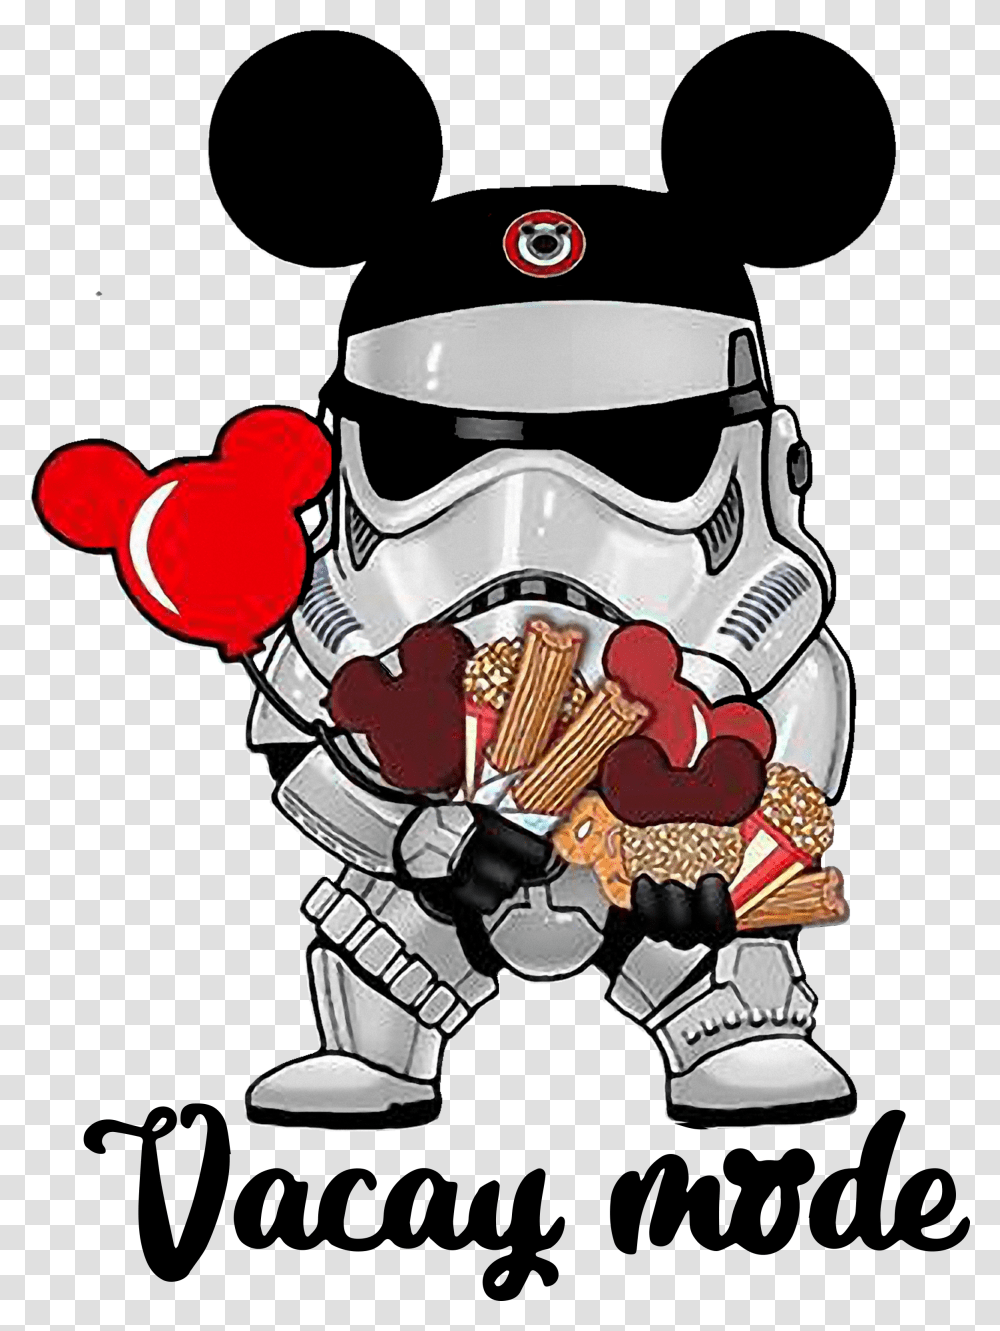 Star Wars Stormtrooper Micky Vacay Mode Star Wars Stormtrooper Chibi Transparent Png